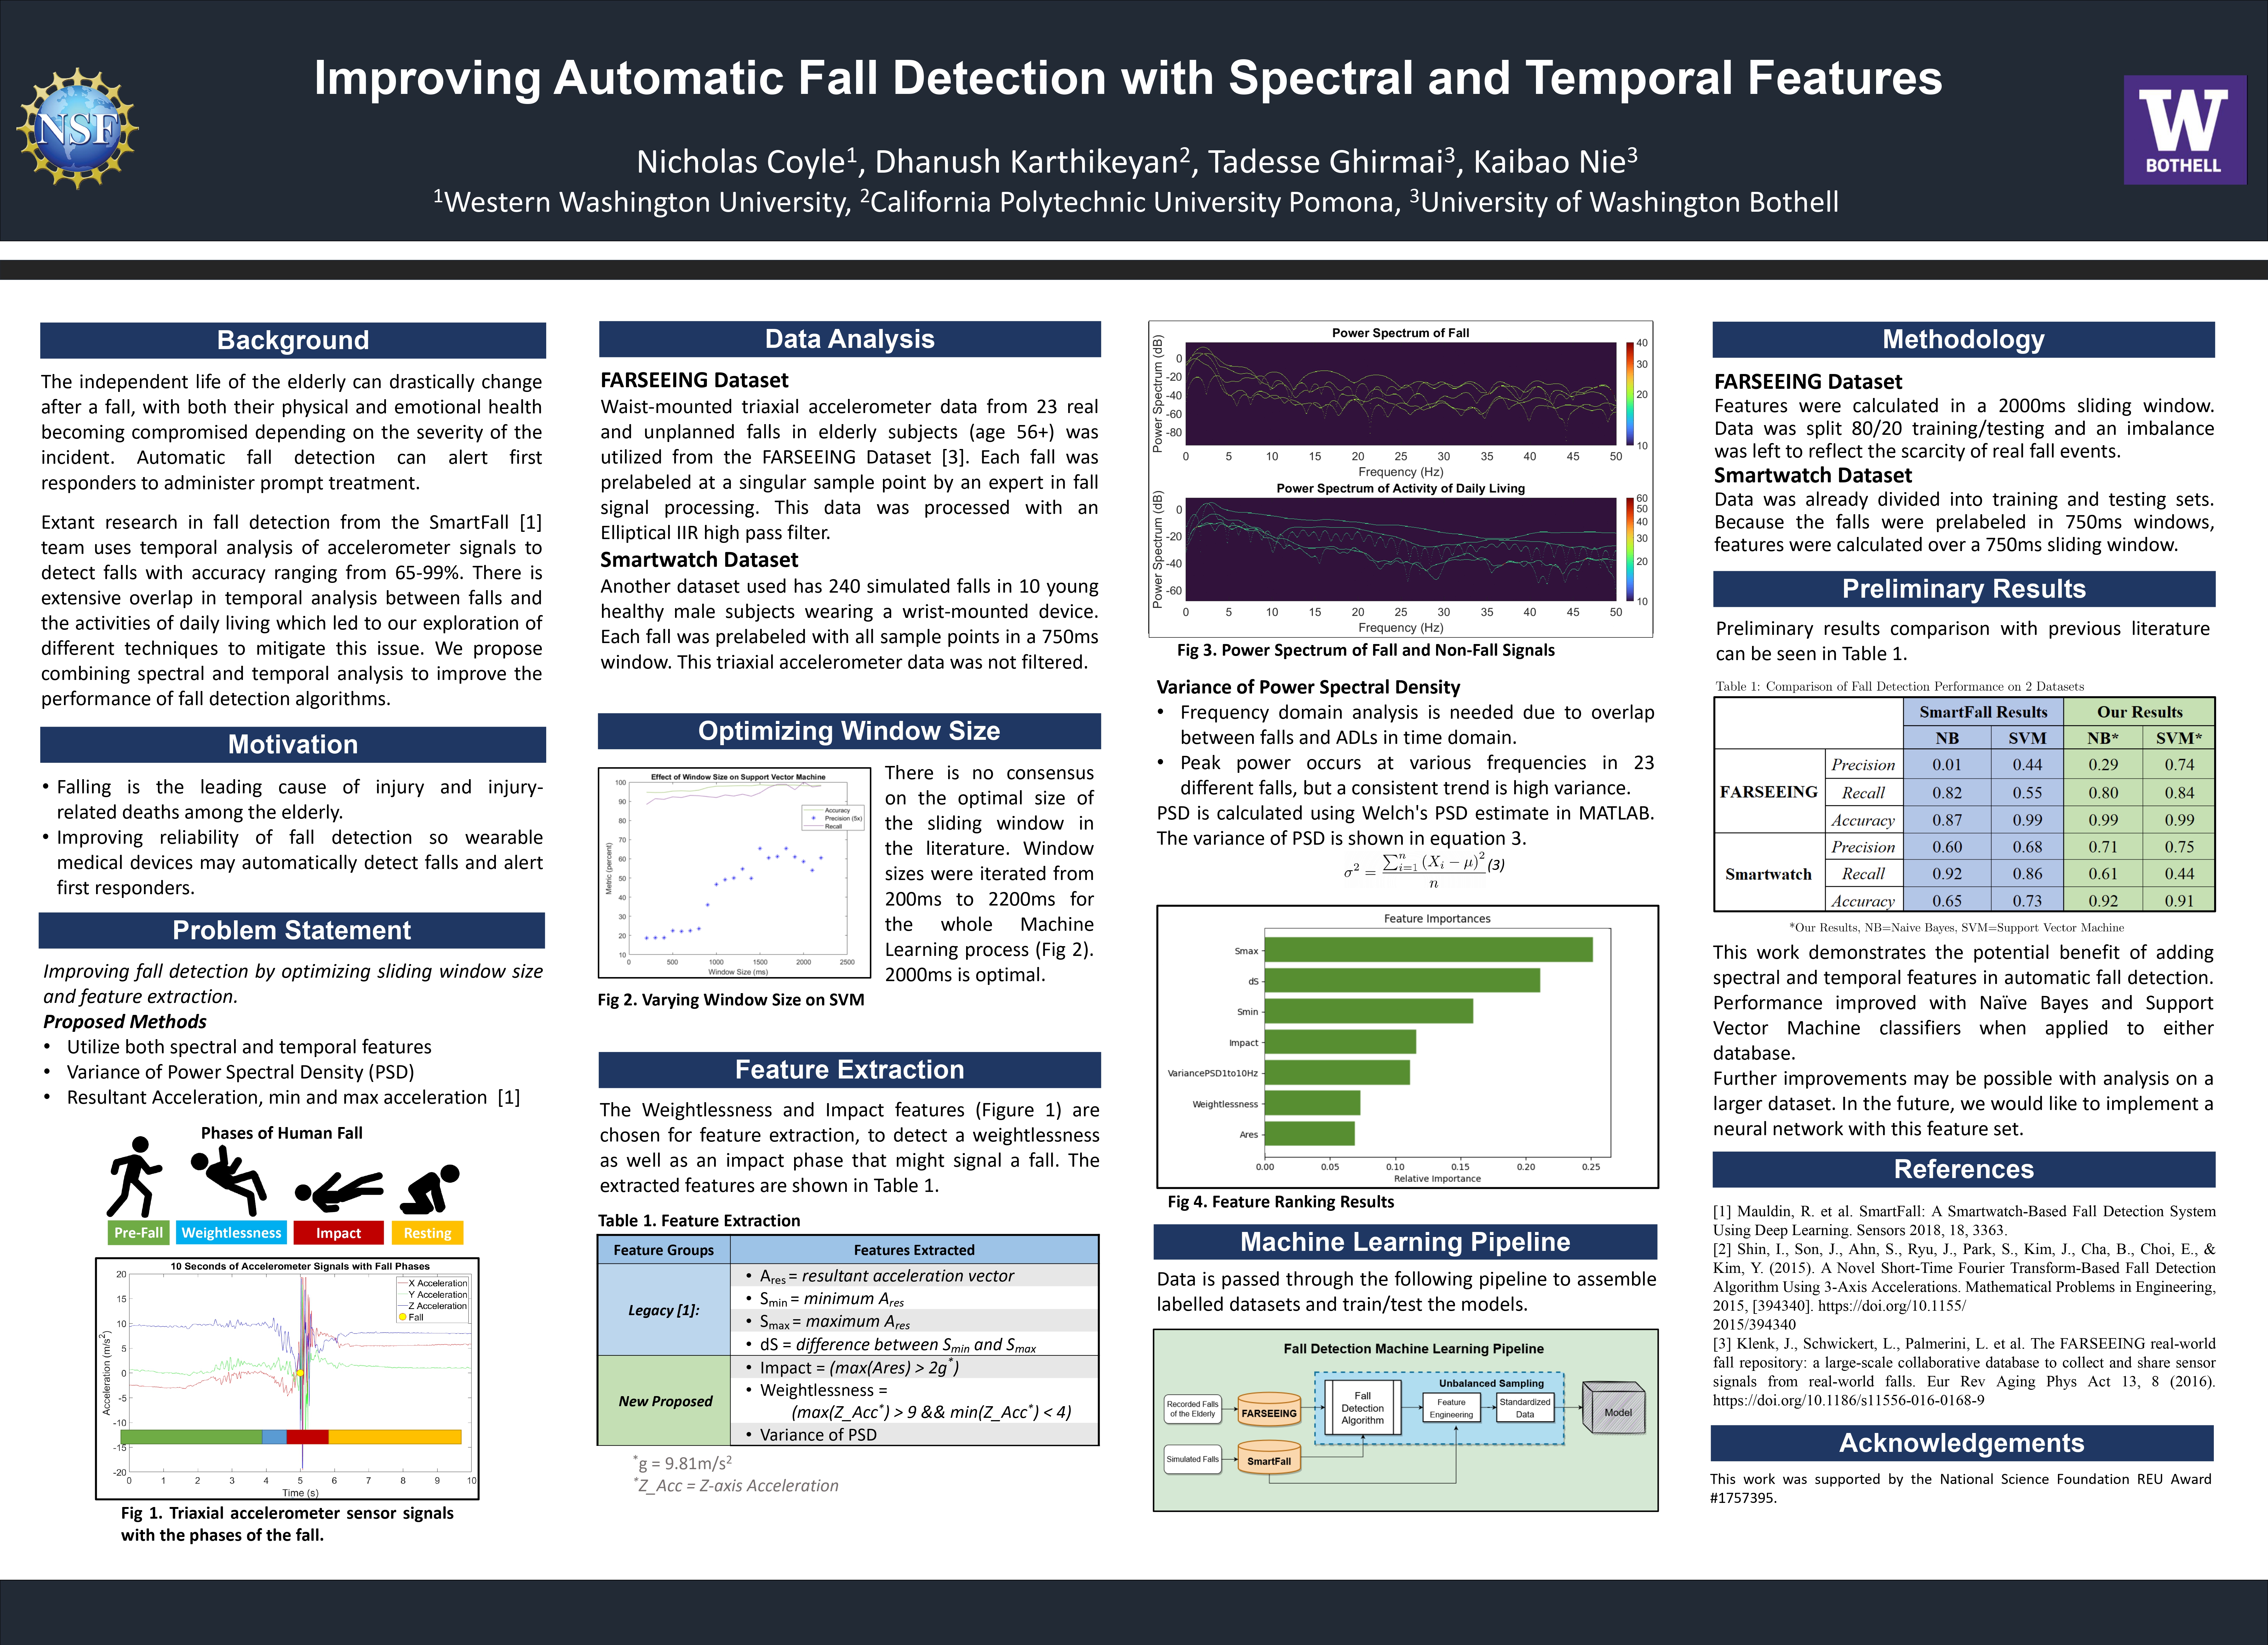 Improving Automatic Fall Detection with Spectral and Temporal Features Poster